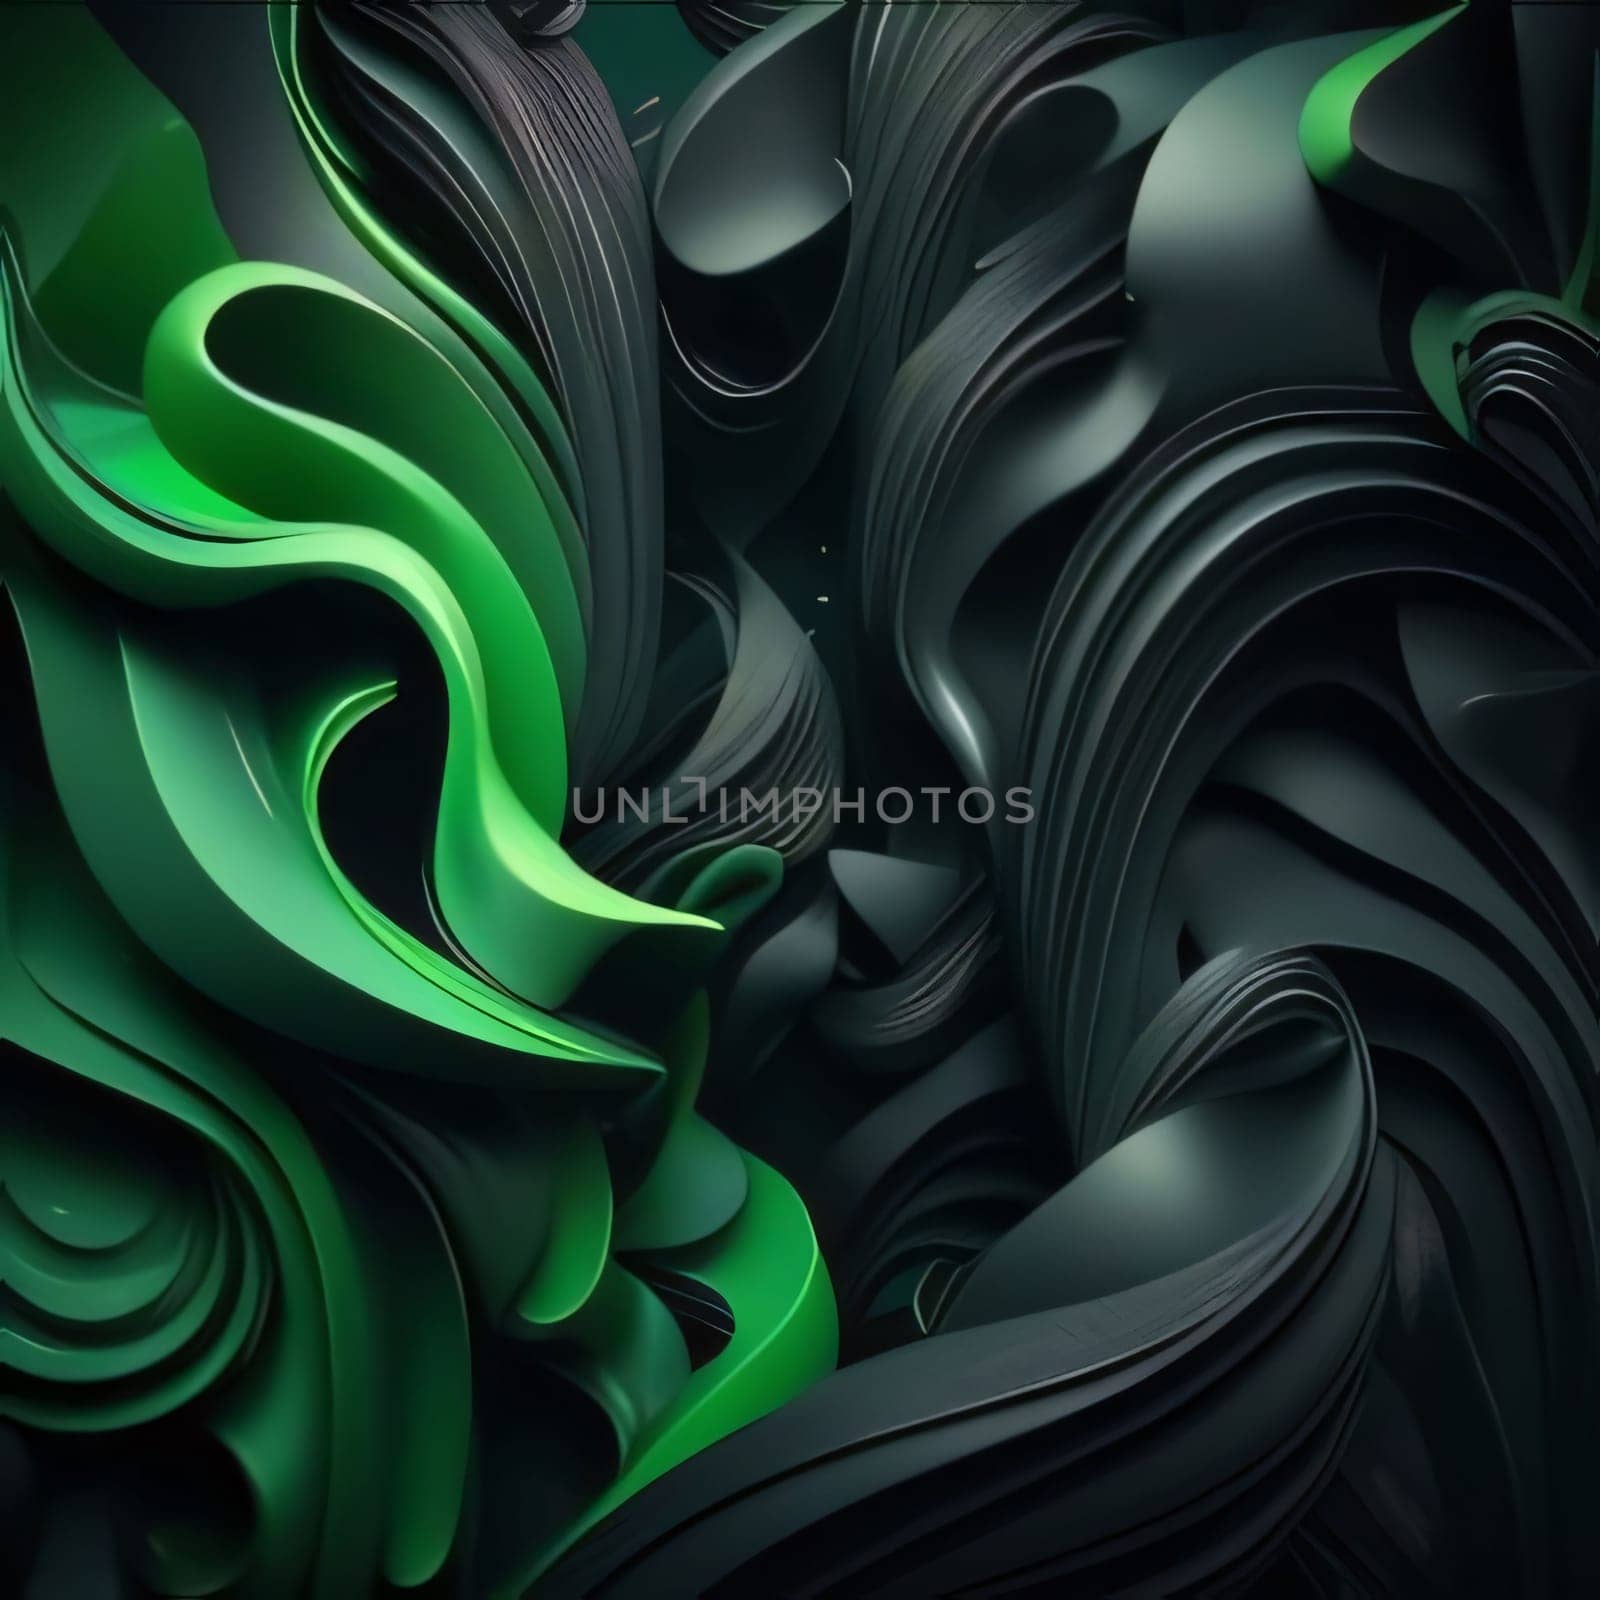 Abstract background design: 3d rendering of abstract wavy background in black and green colors